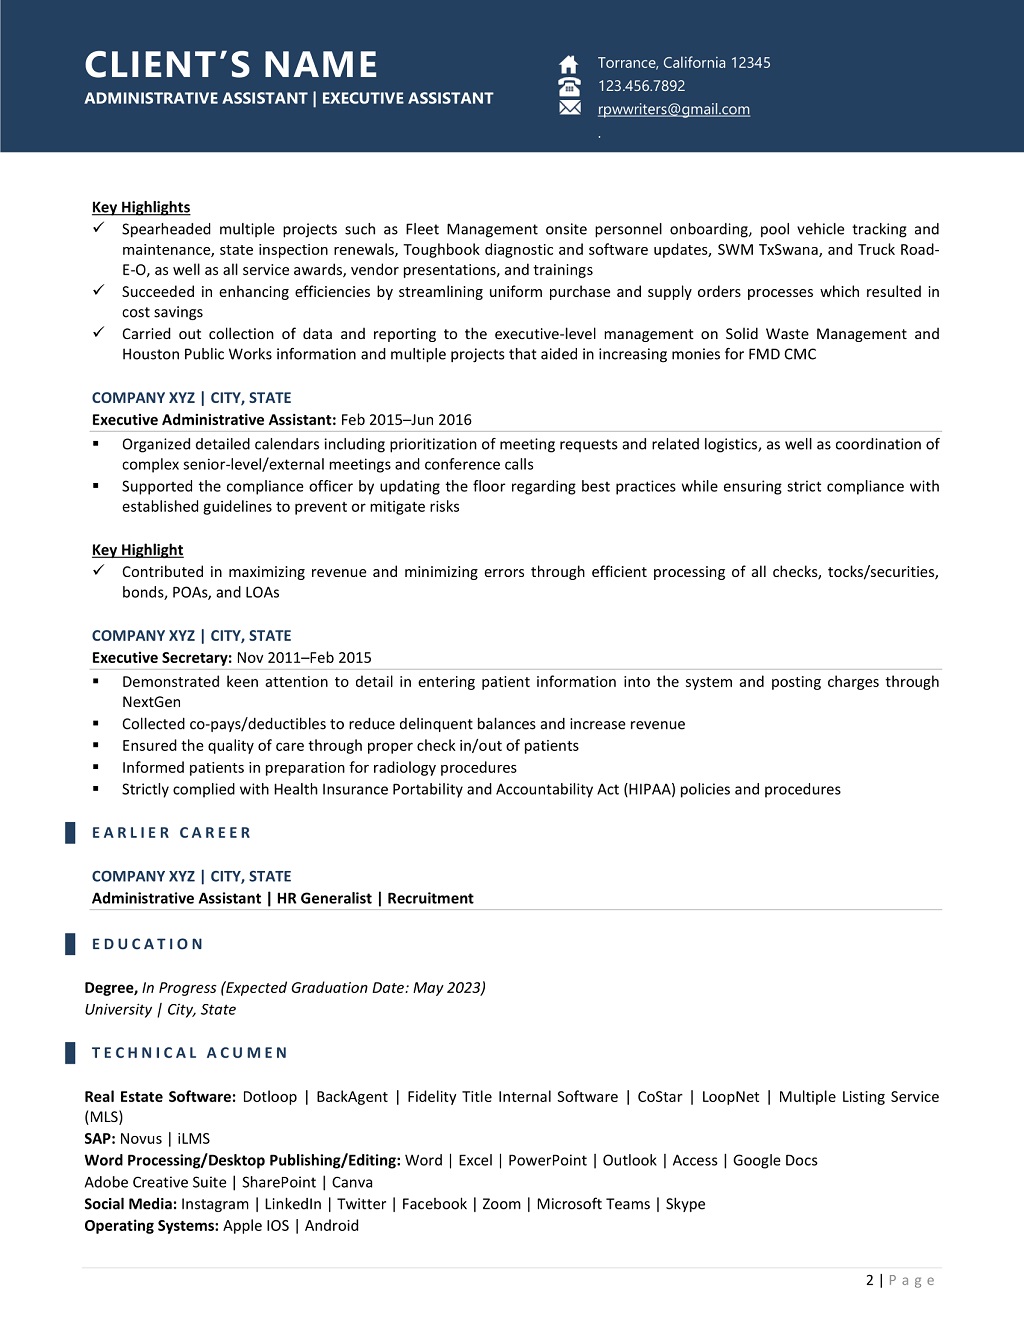 Administrative Assistant Resume Page Two